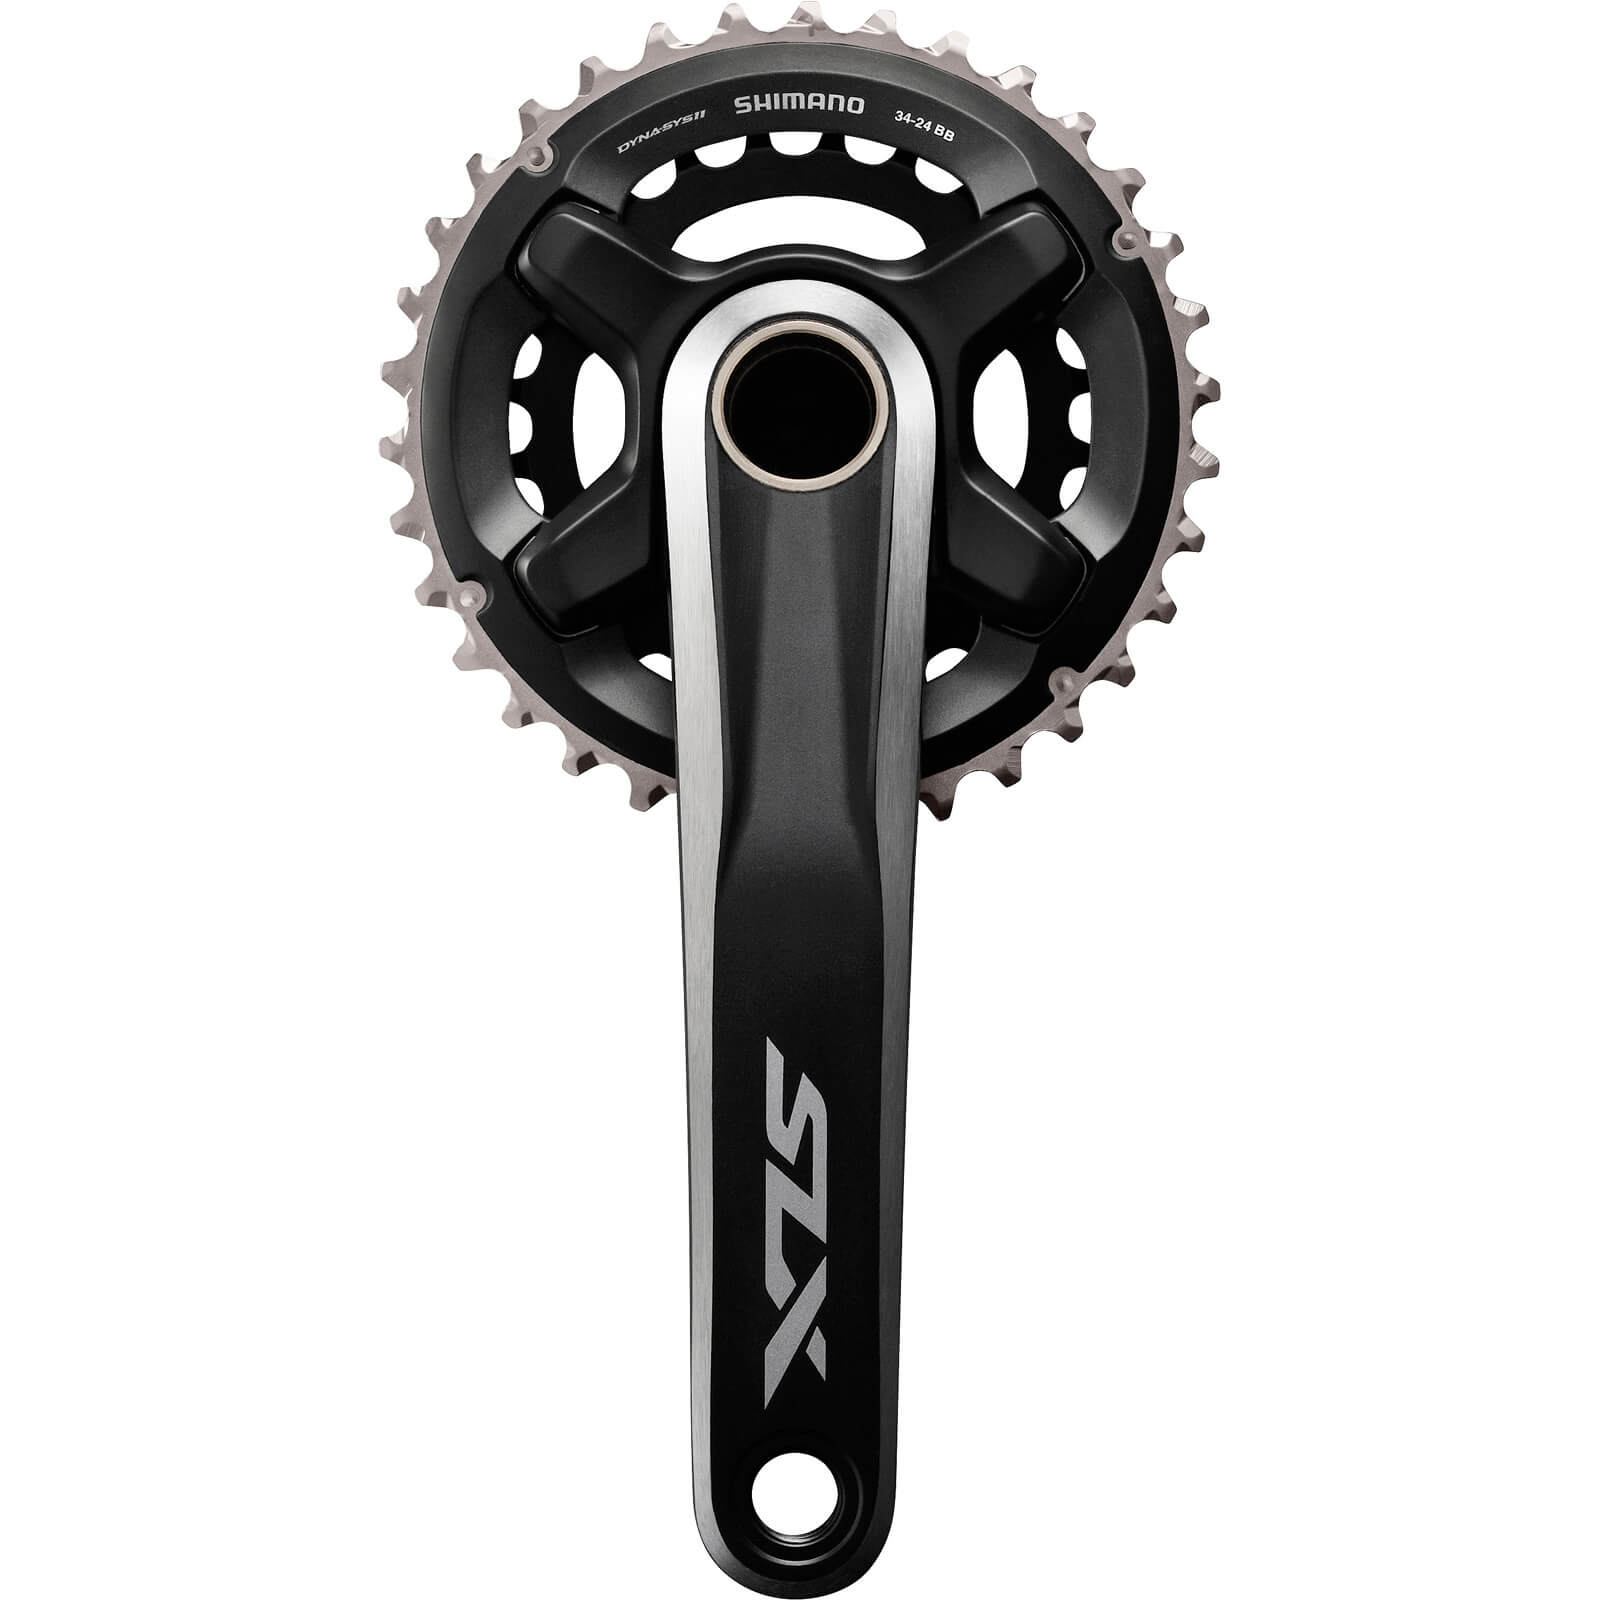 Shimano FC-M7000 SLX Chainset 11-Speed - 34/24T - 170mm - 51.8mm Chainline